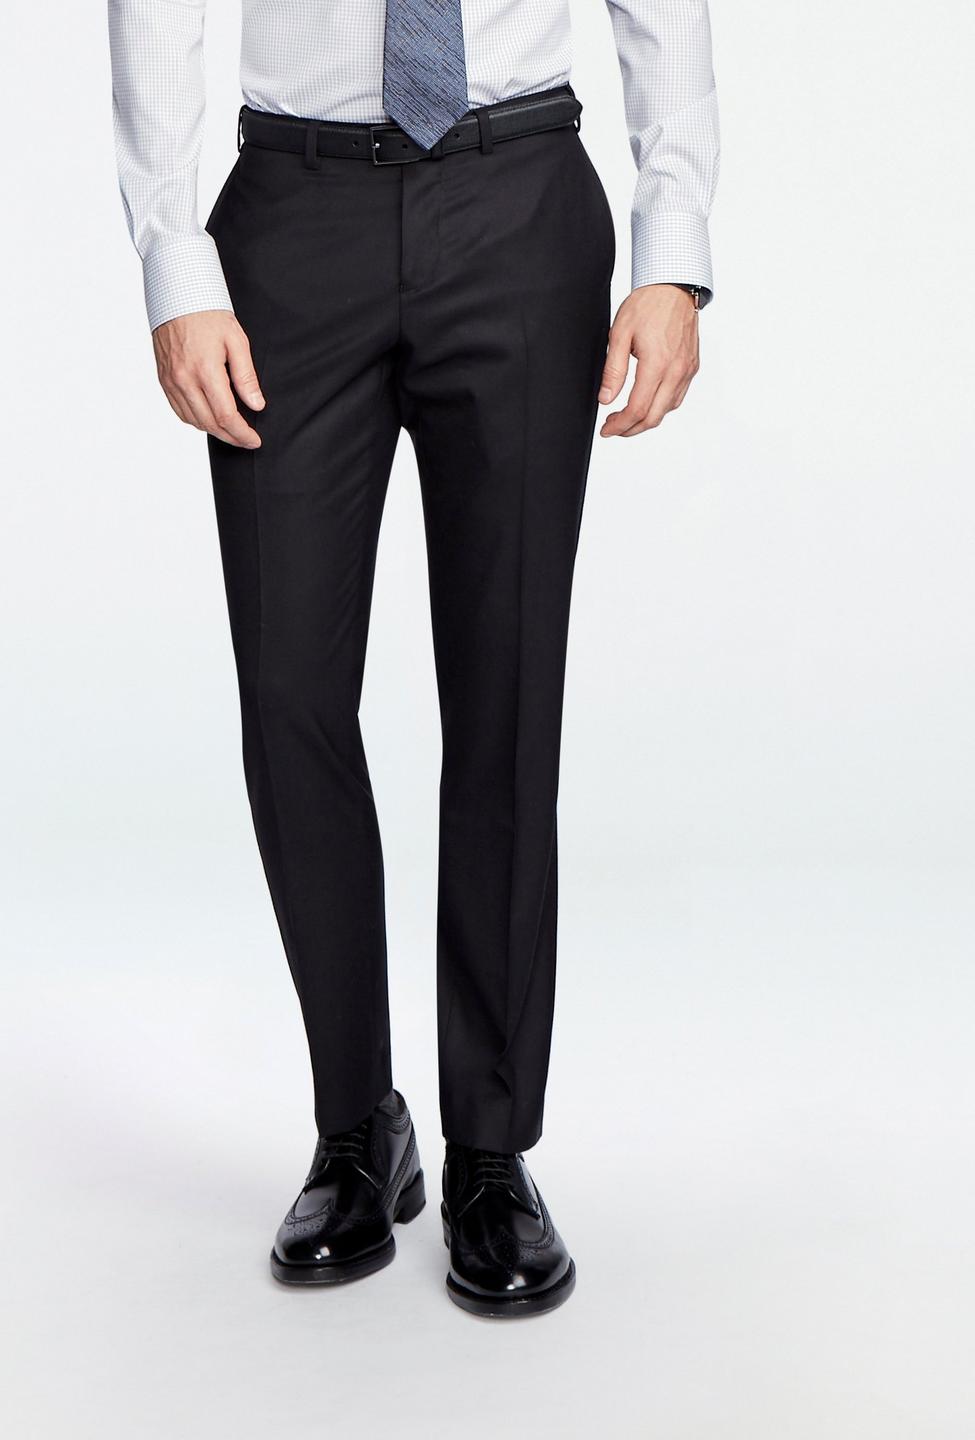 Black pants - Solid Design from Luxury Indochino Collection